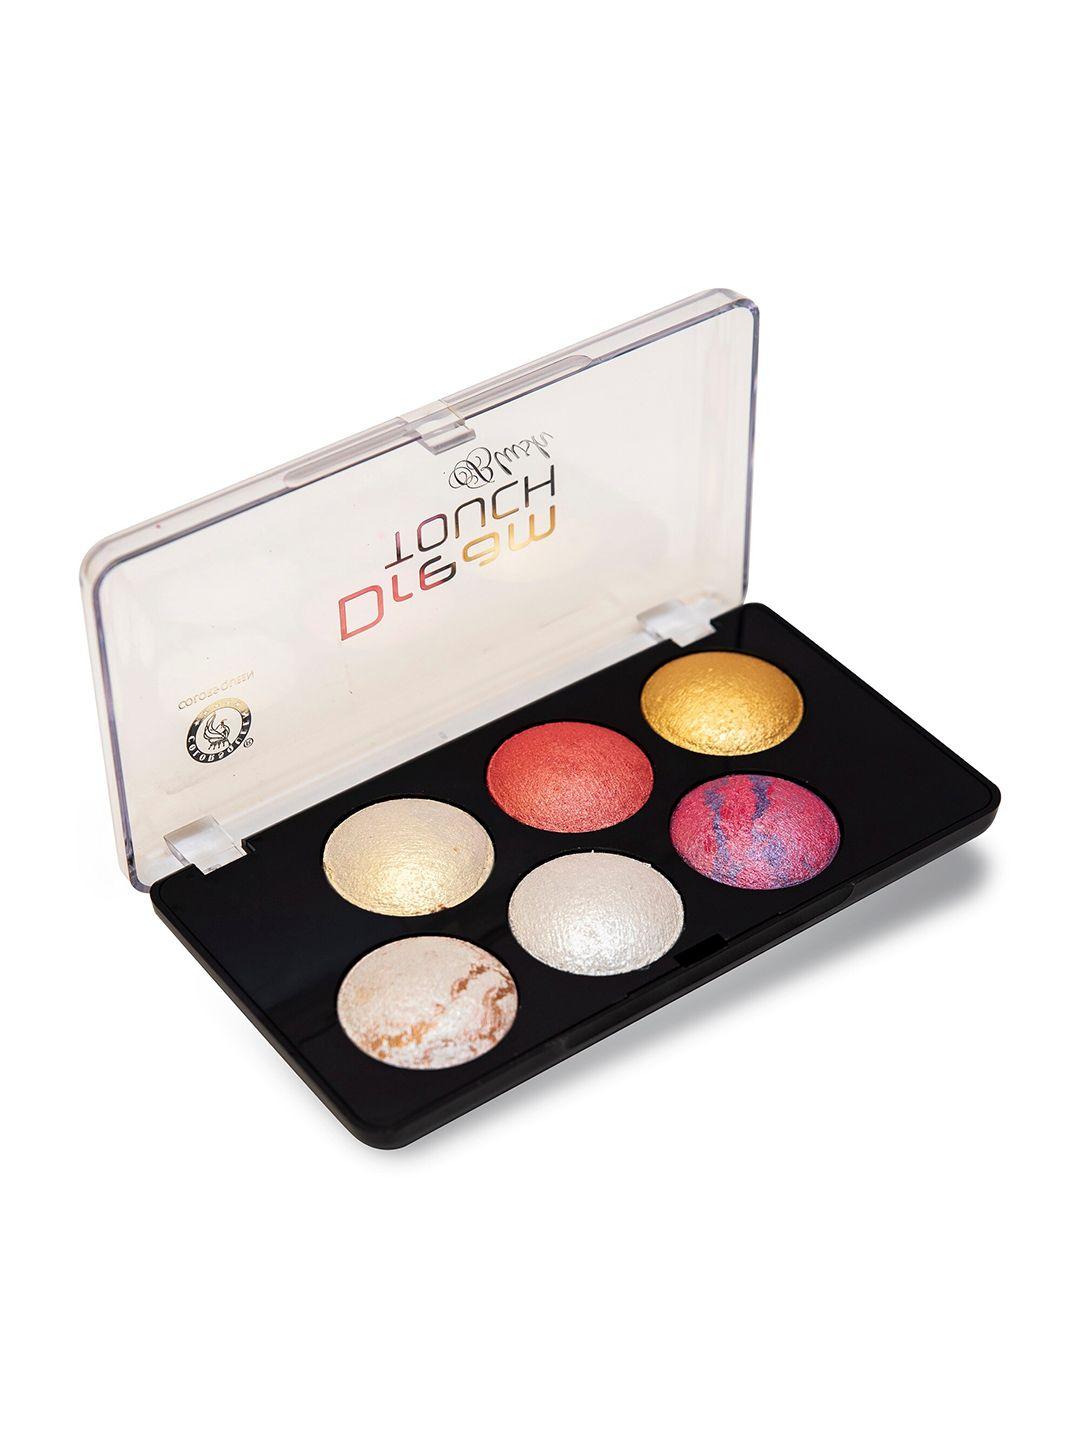 colors queen dream touch professional make up blusher palette 18 g - shade 06